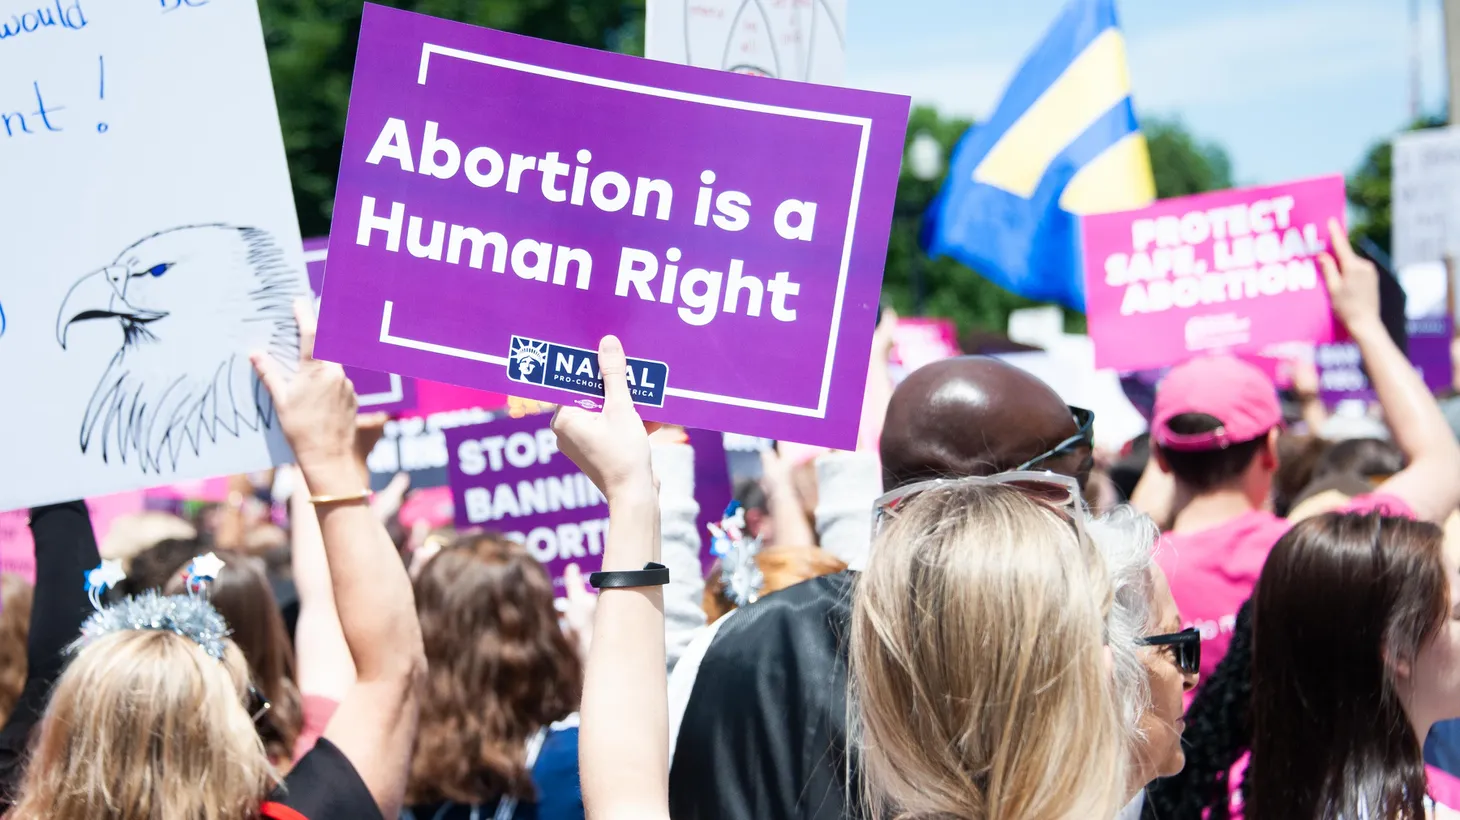 An activist holds a sign that says, “Abortion is a human right,” in Washington D.C., May 21, 2019.